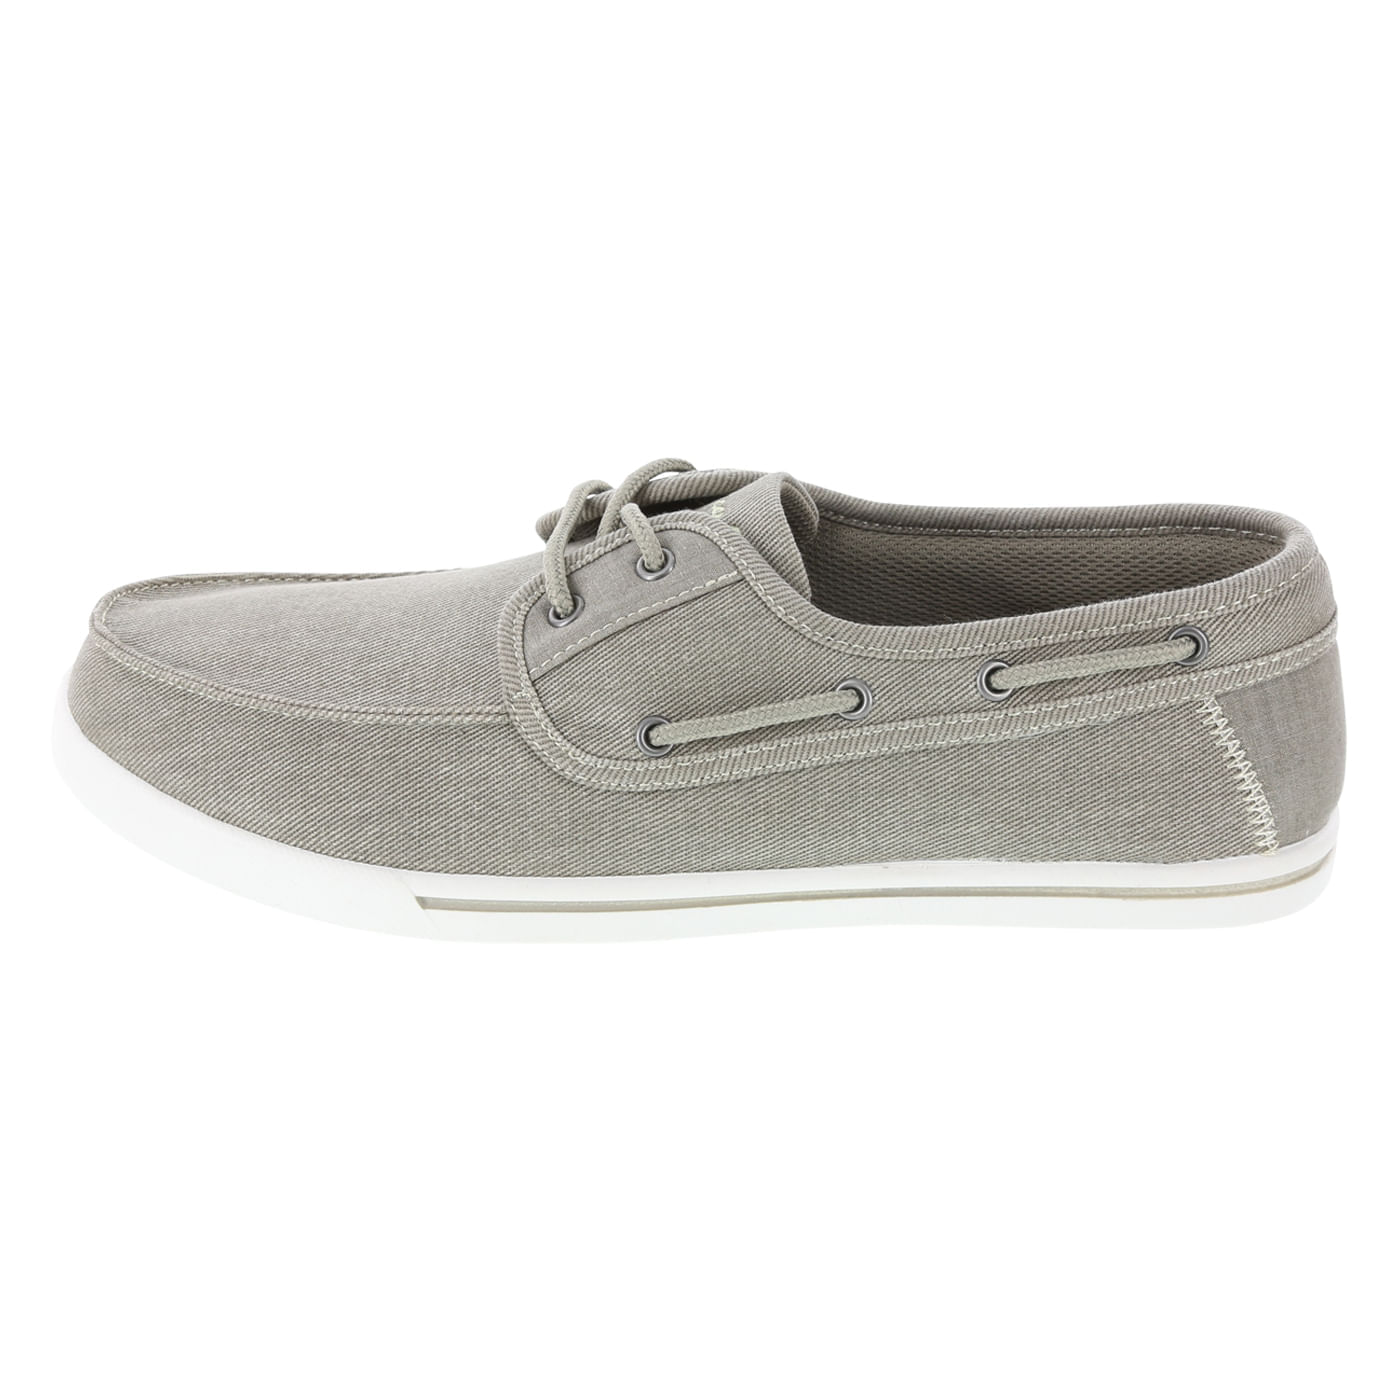 womens boat shoes payless